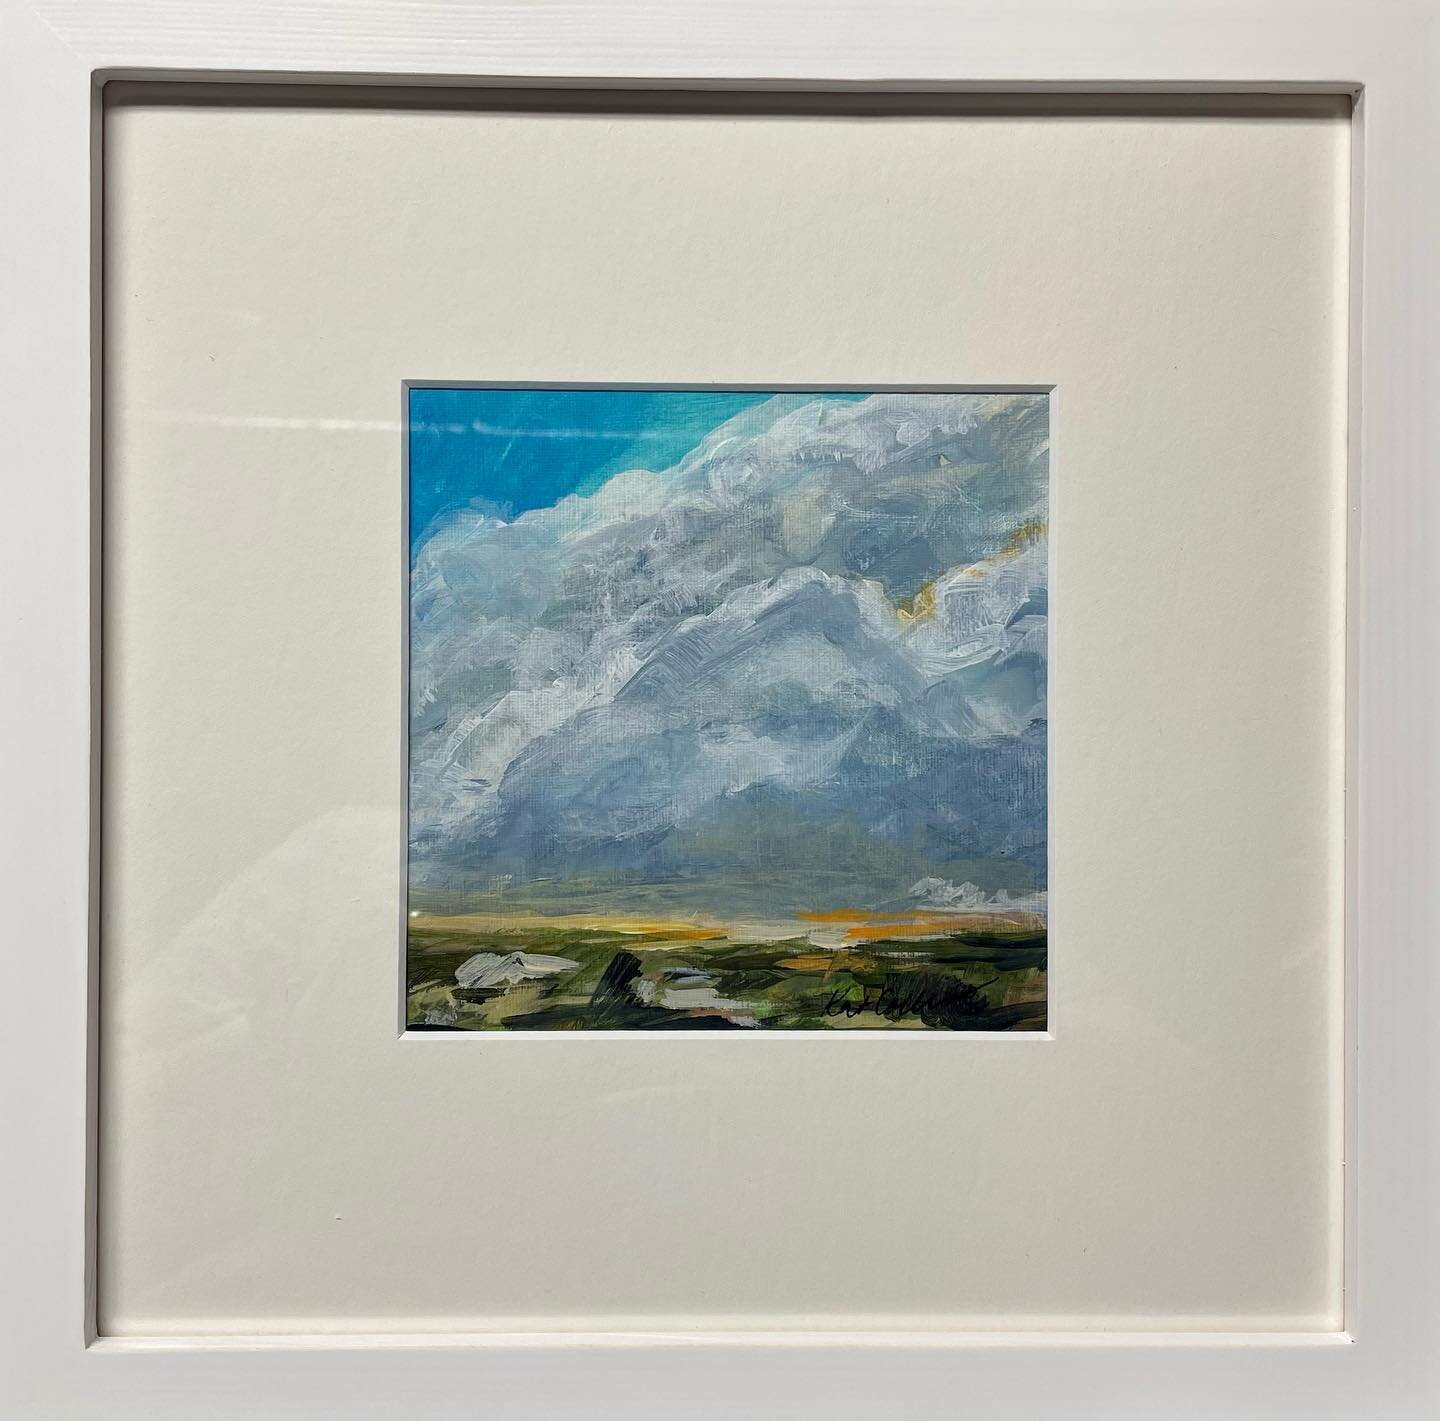 I have only 4 cloud studies still available, with frames in white with off-white mats! The paintings are acrylic on Canva-paper, each 5&rdquo; x 5&rdquo;. With the frame it is 10&rdquo; x 10&rdquo;. These cloud studies were a small series I did that 